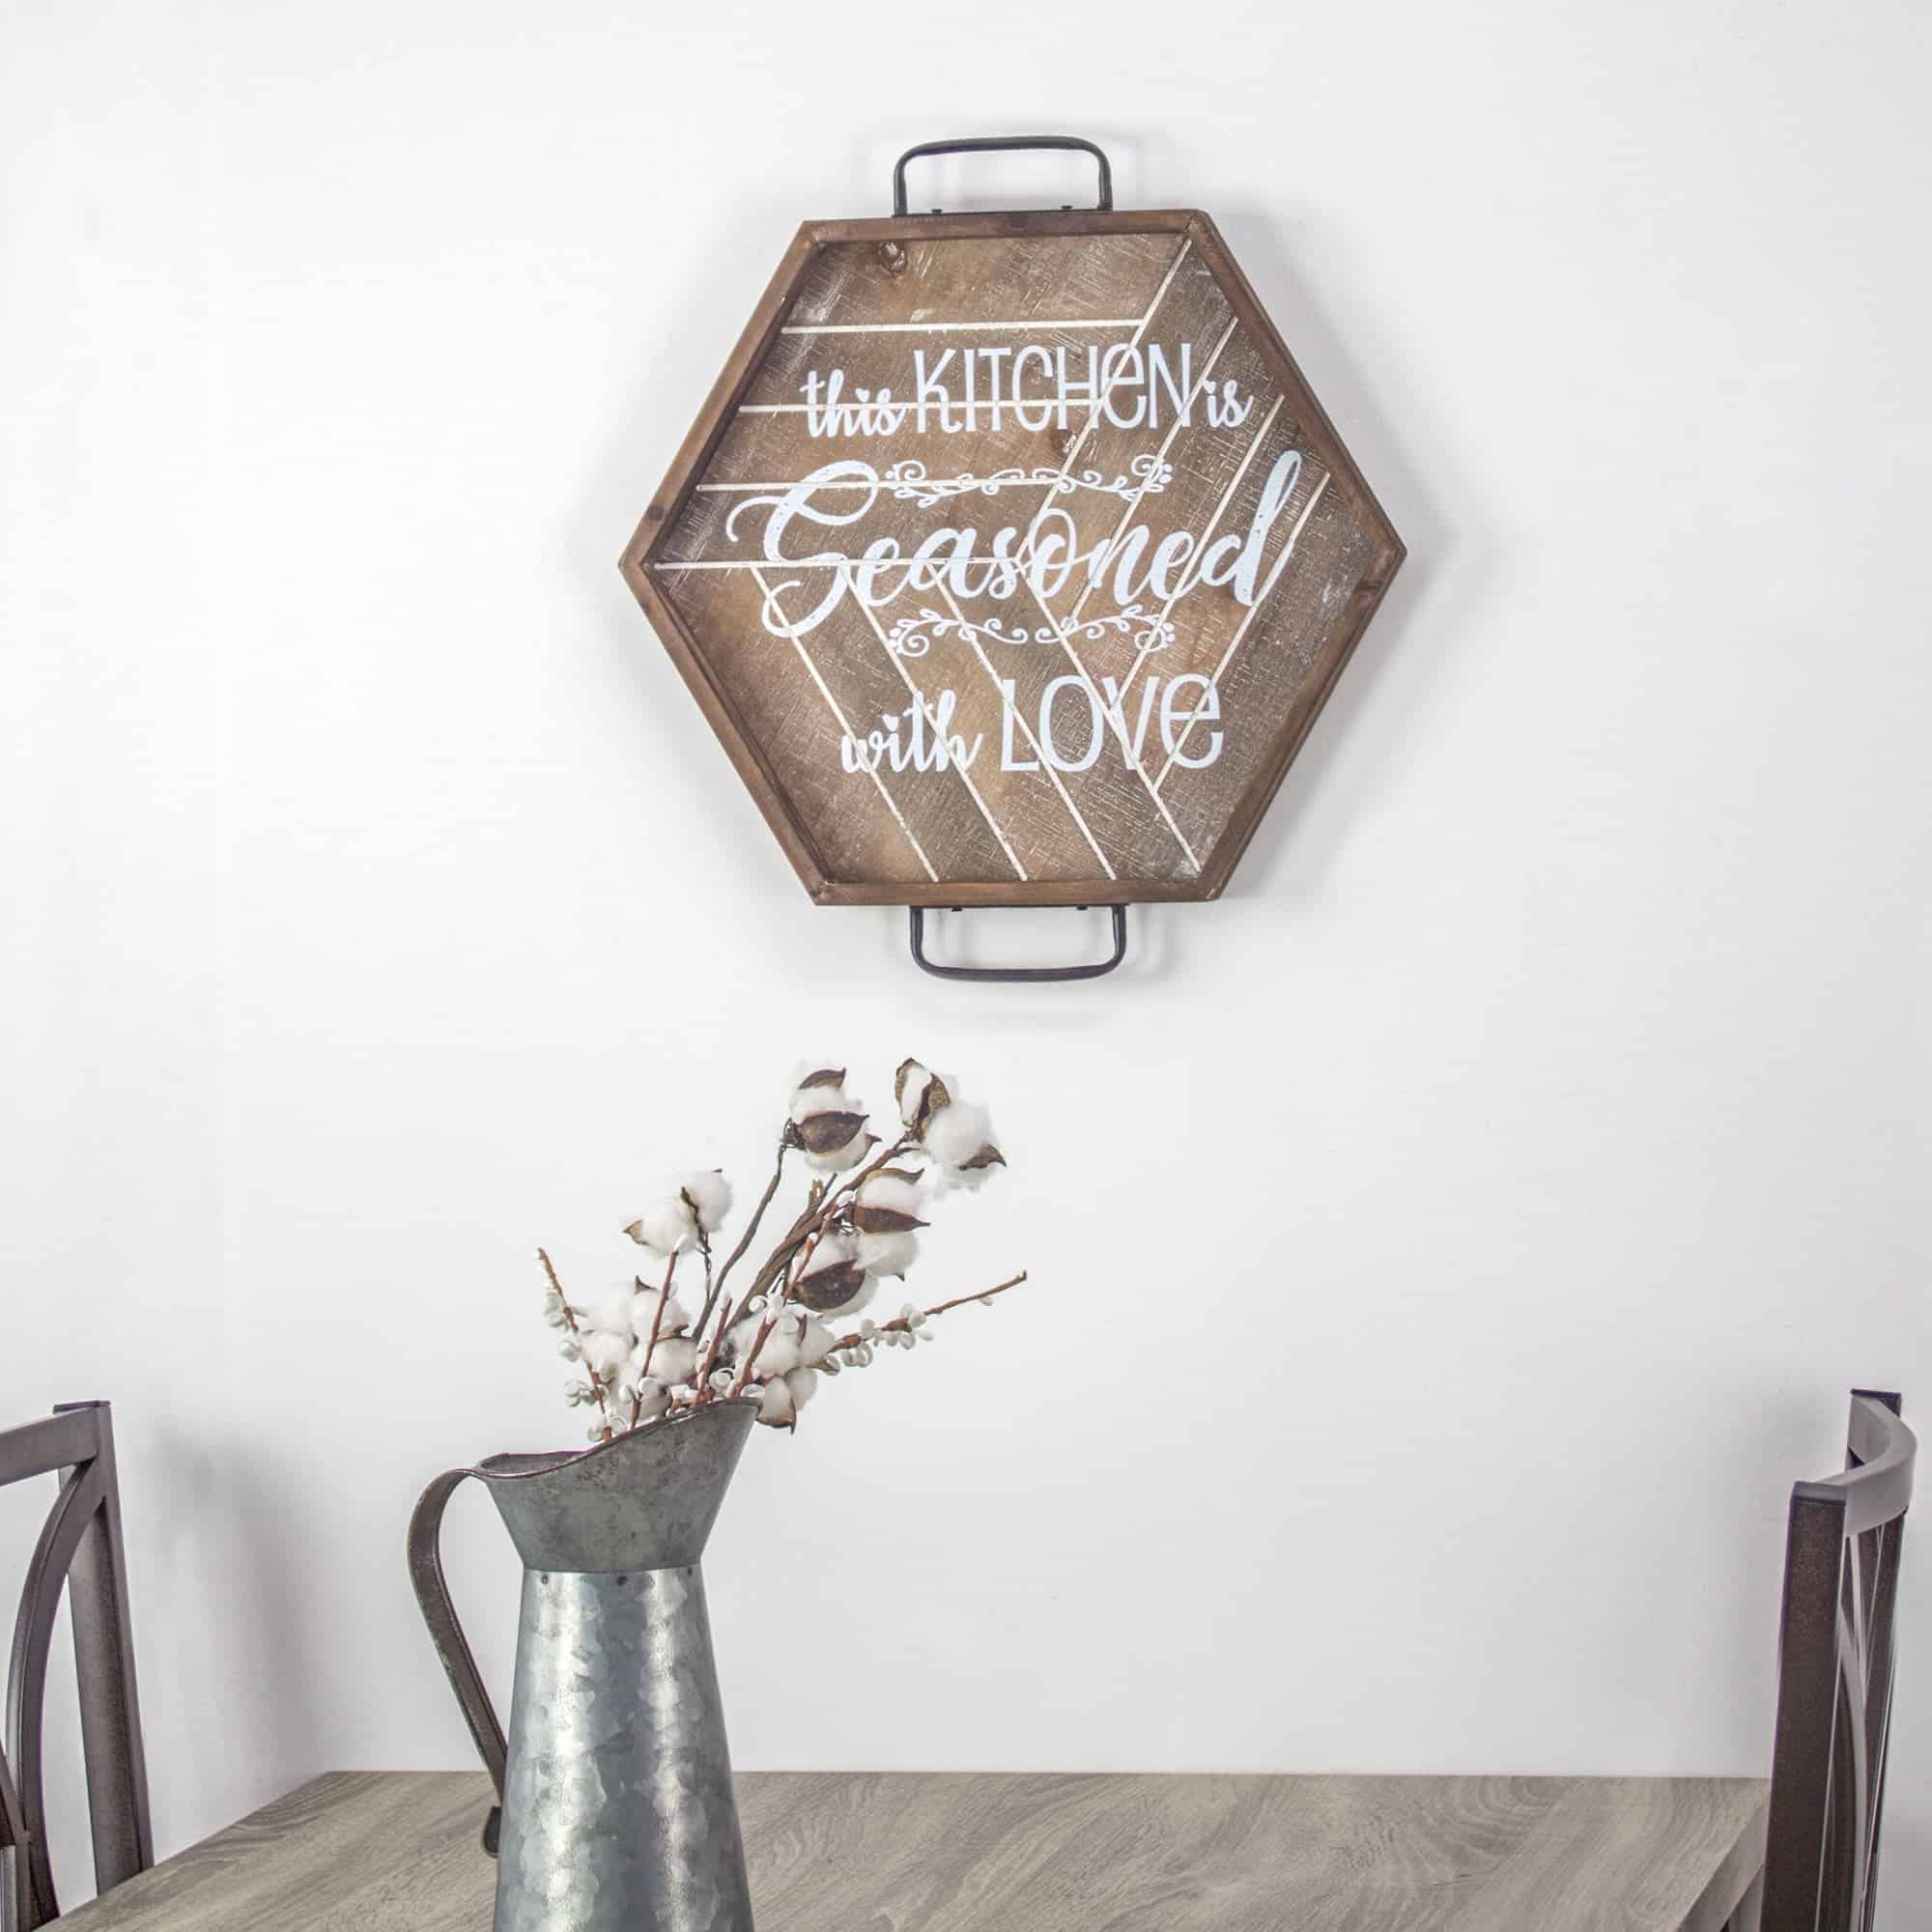 Metal Wall Decor Makes For a Charming Addition to Your Rustic Kitchen